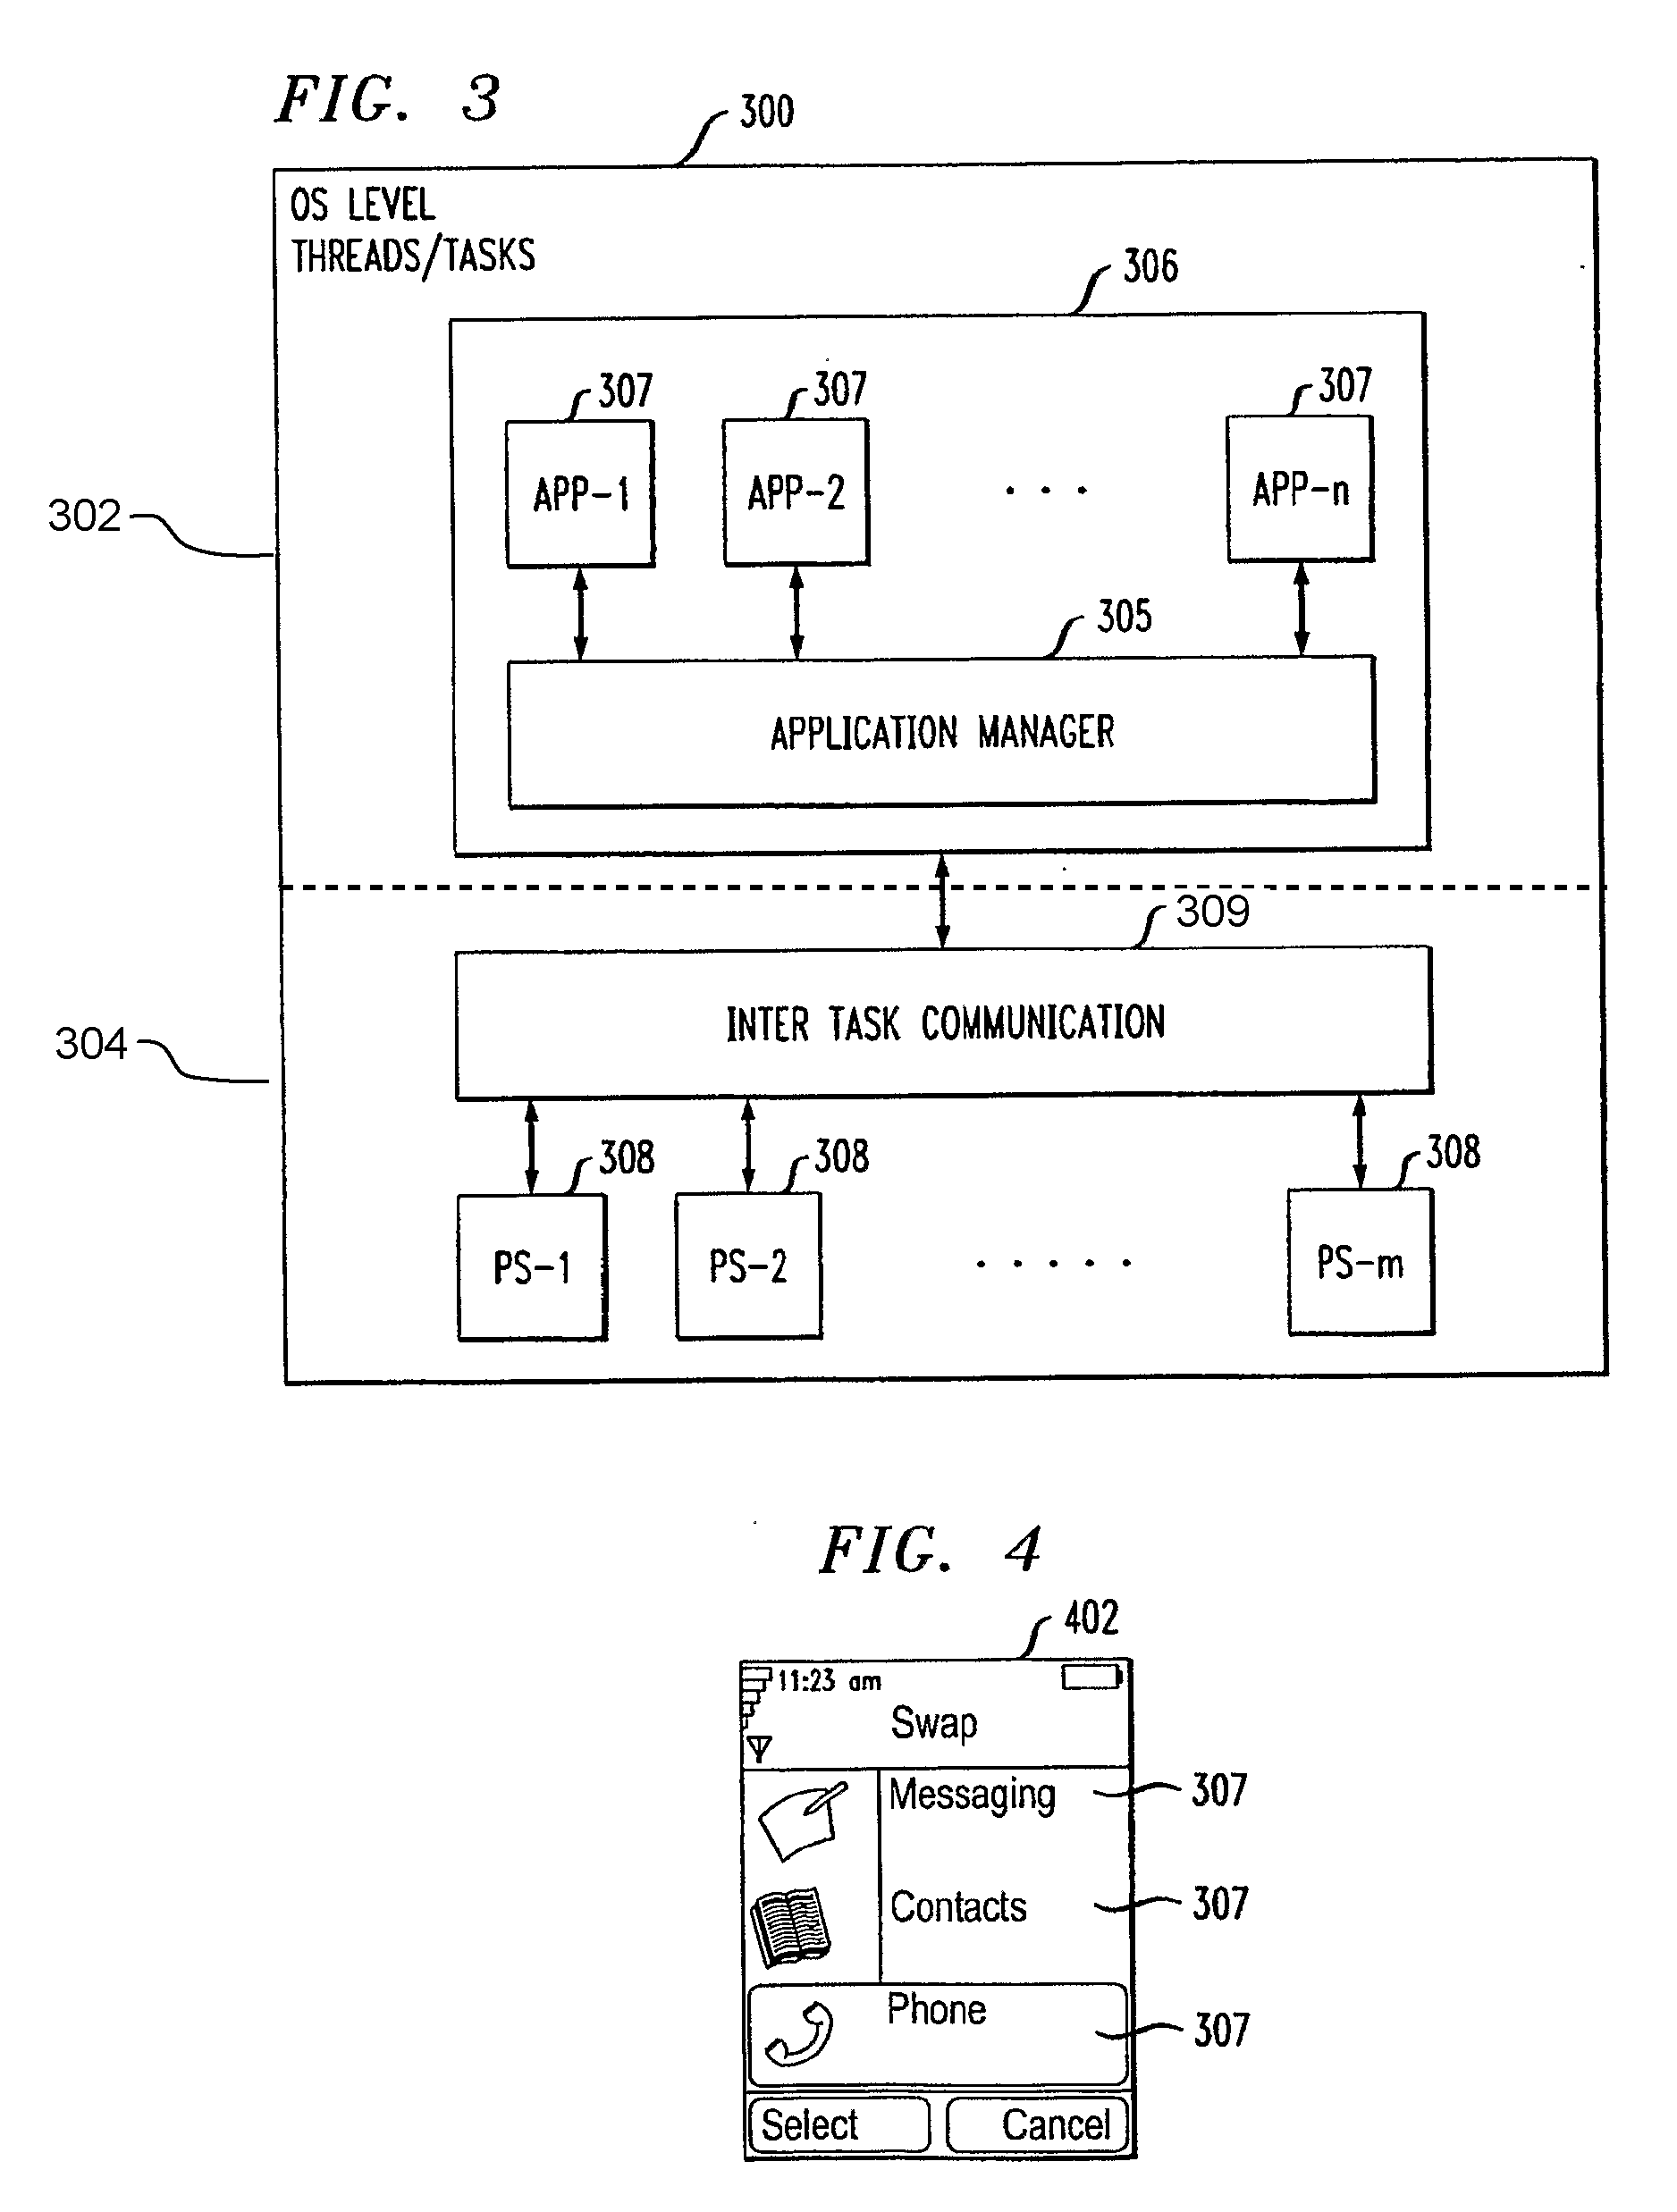 Application switching in a single threaded architecture for devices